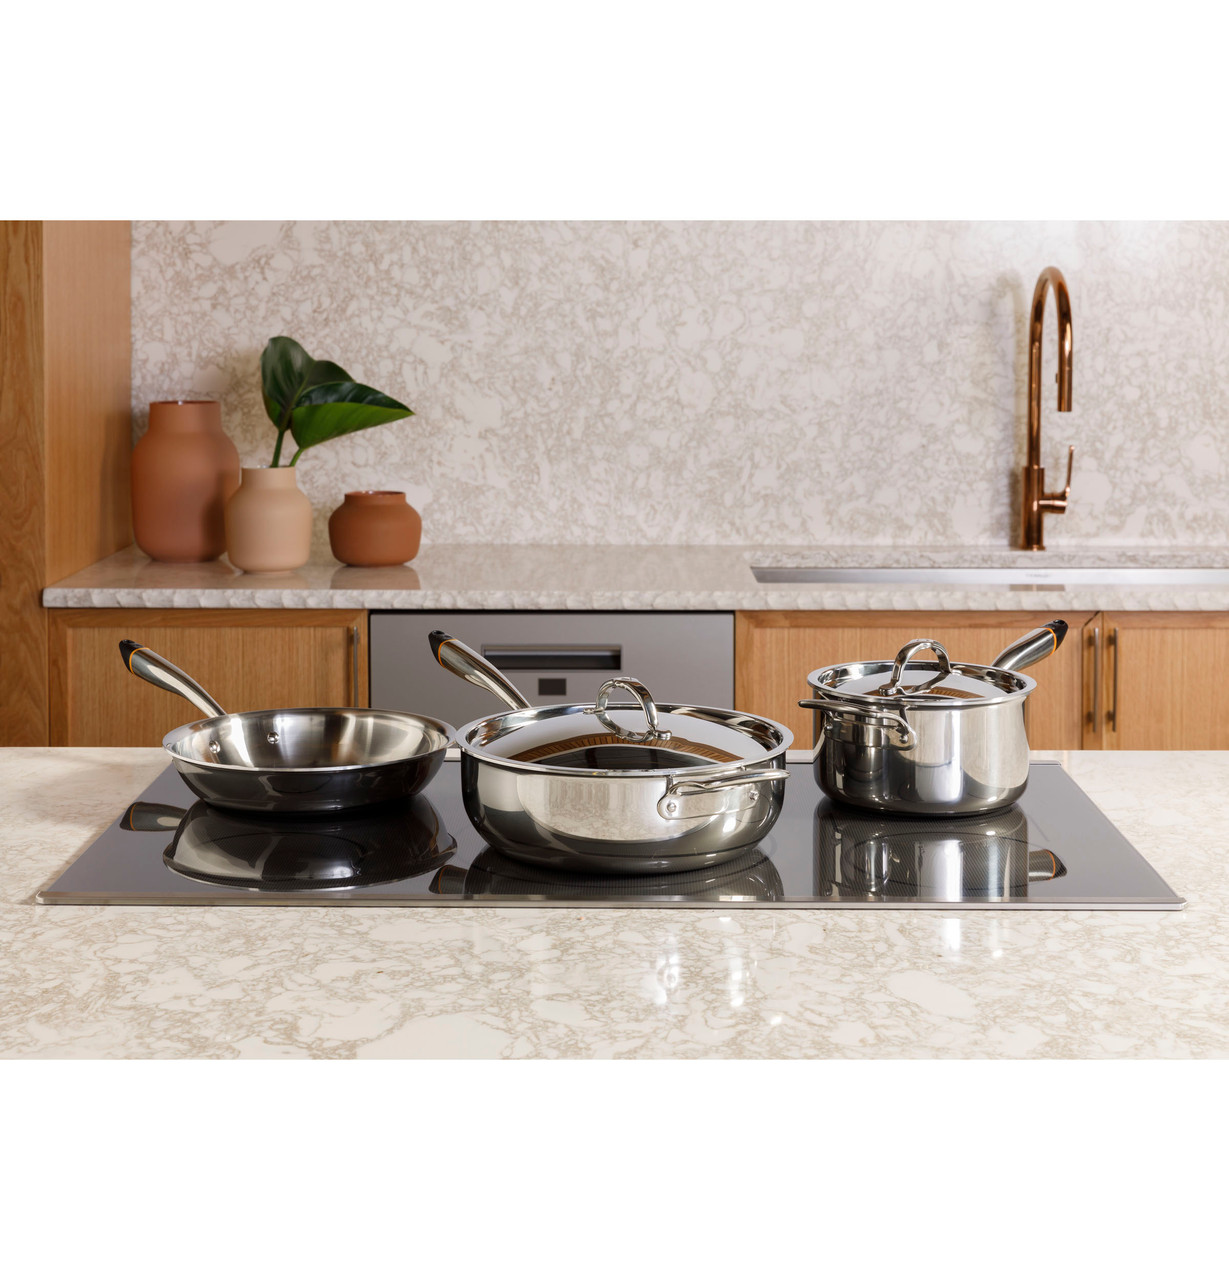 Café™ Series 30 Built-In Touch Control Induction Cooktop - CHP90301TBB -  Cafe Appliances